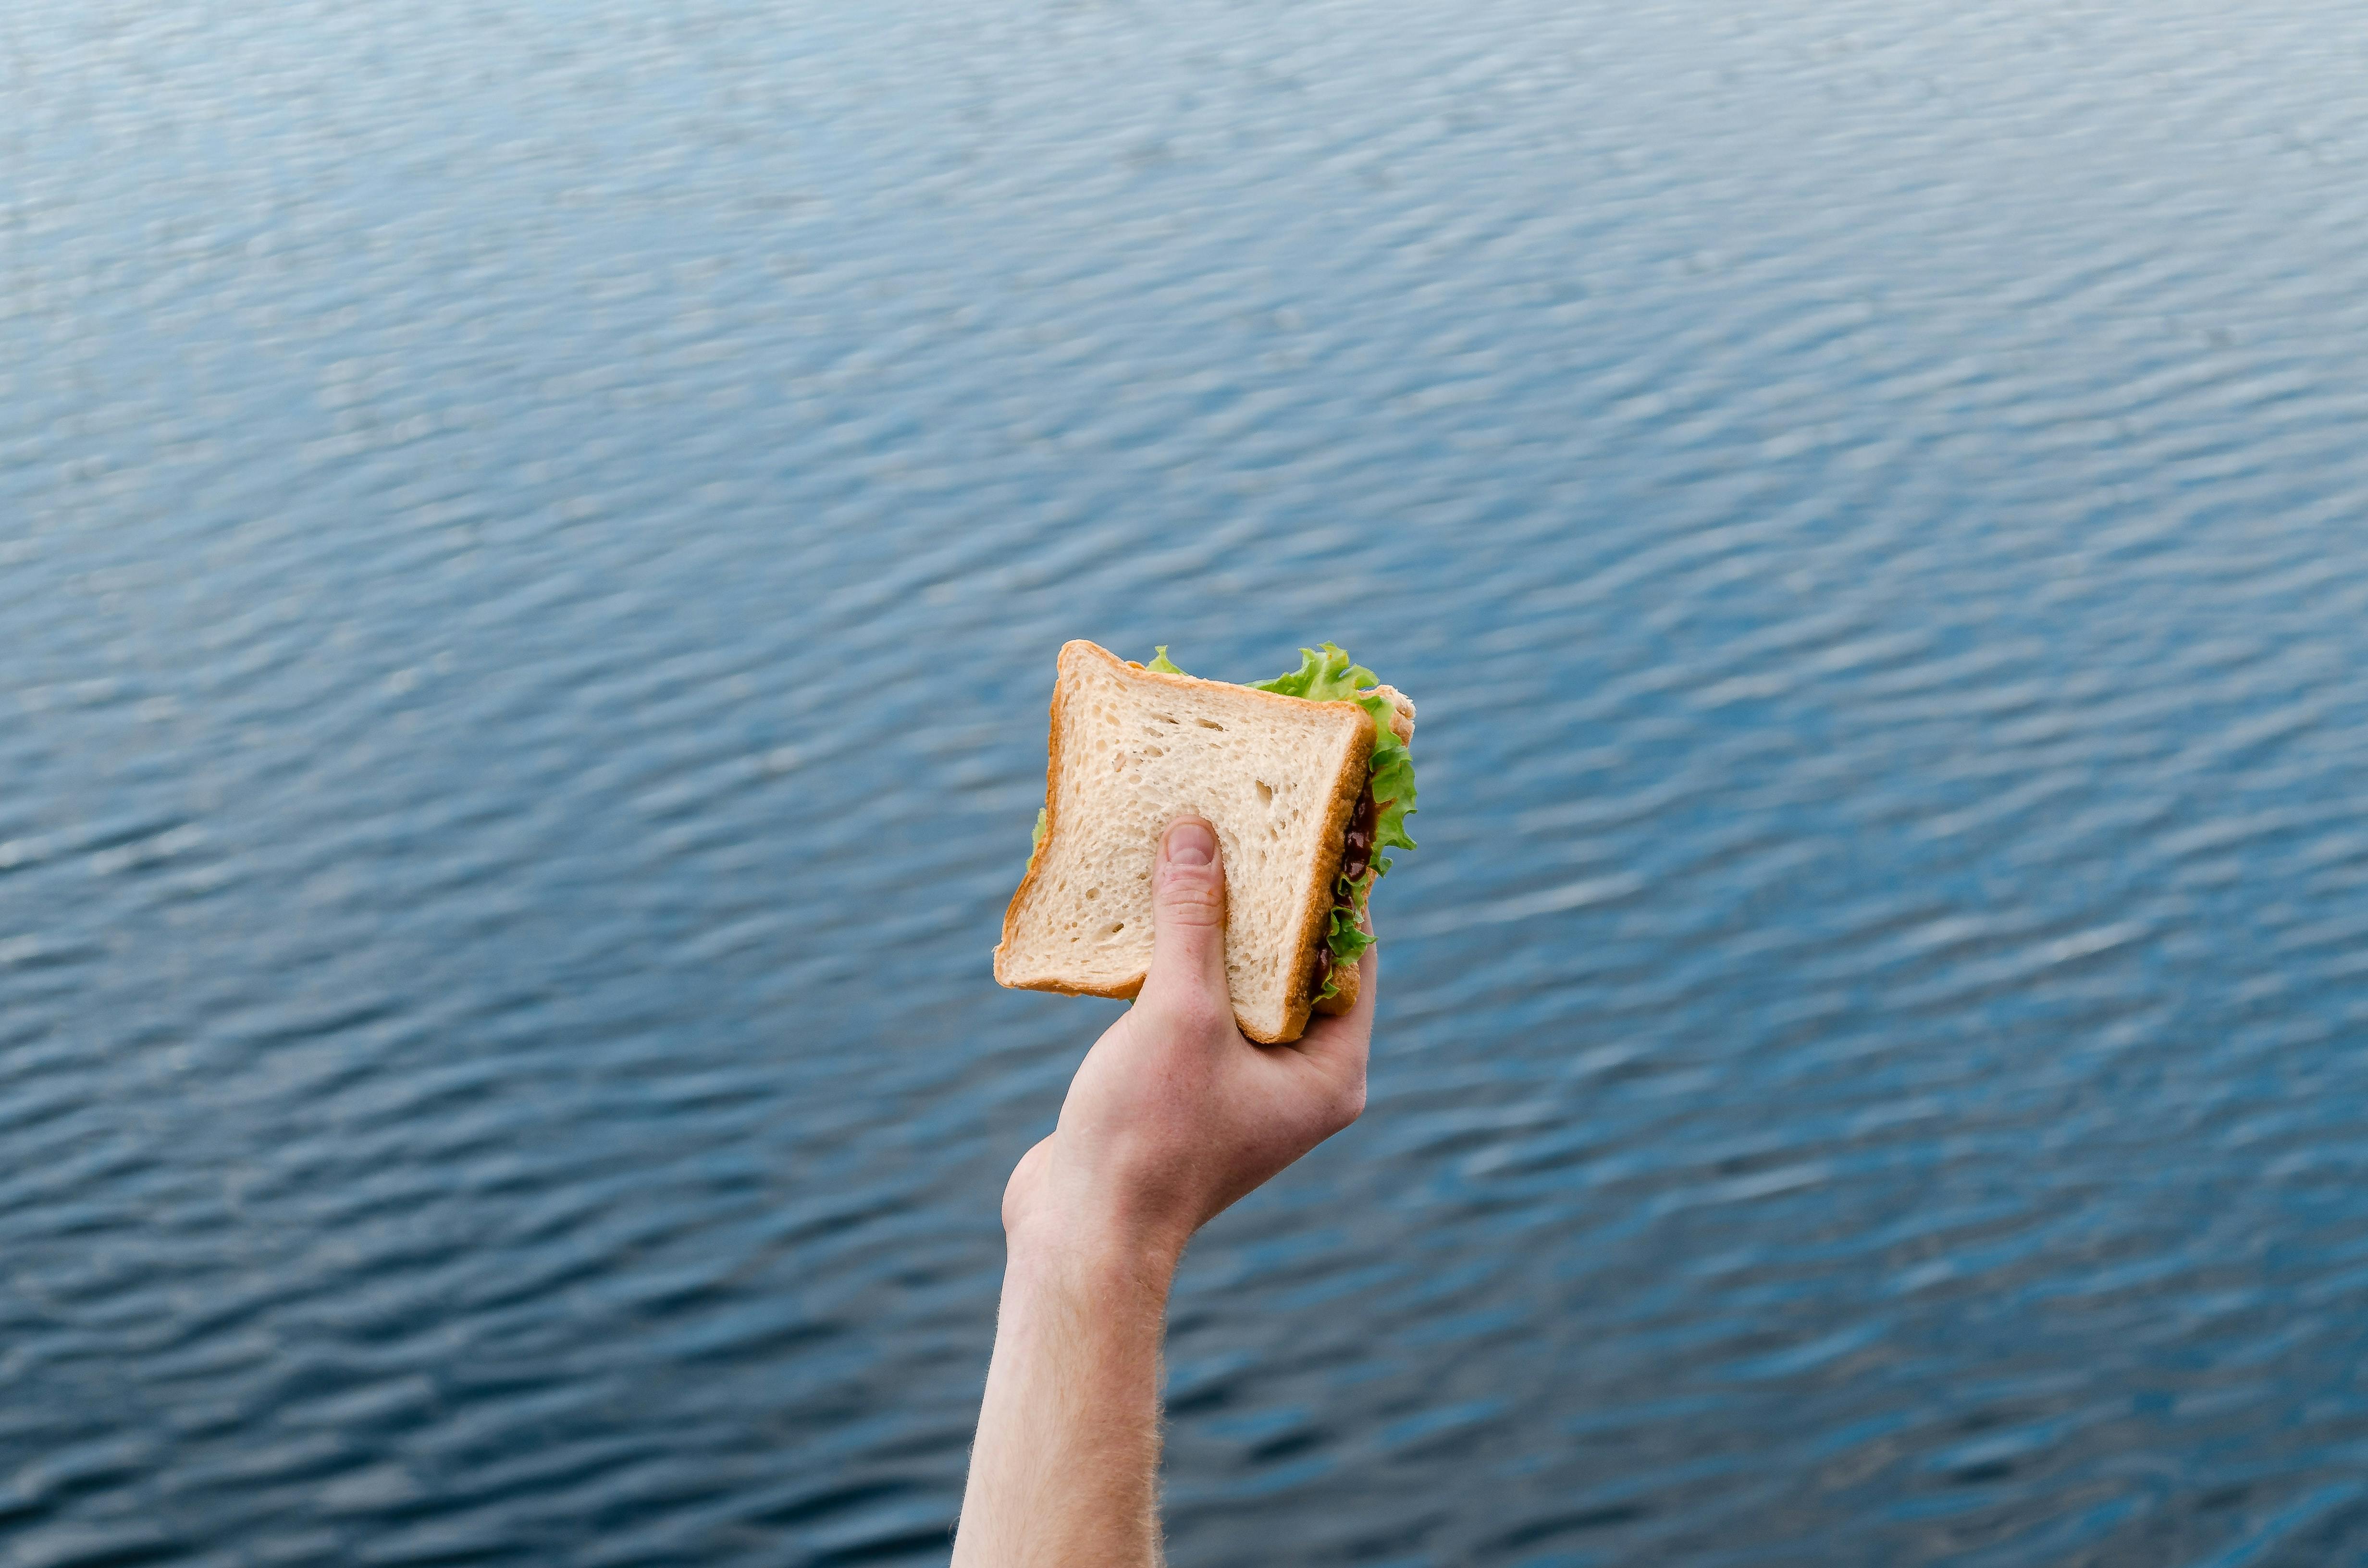 A hand holding up a sandwich with a body of water in the background.